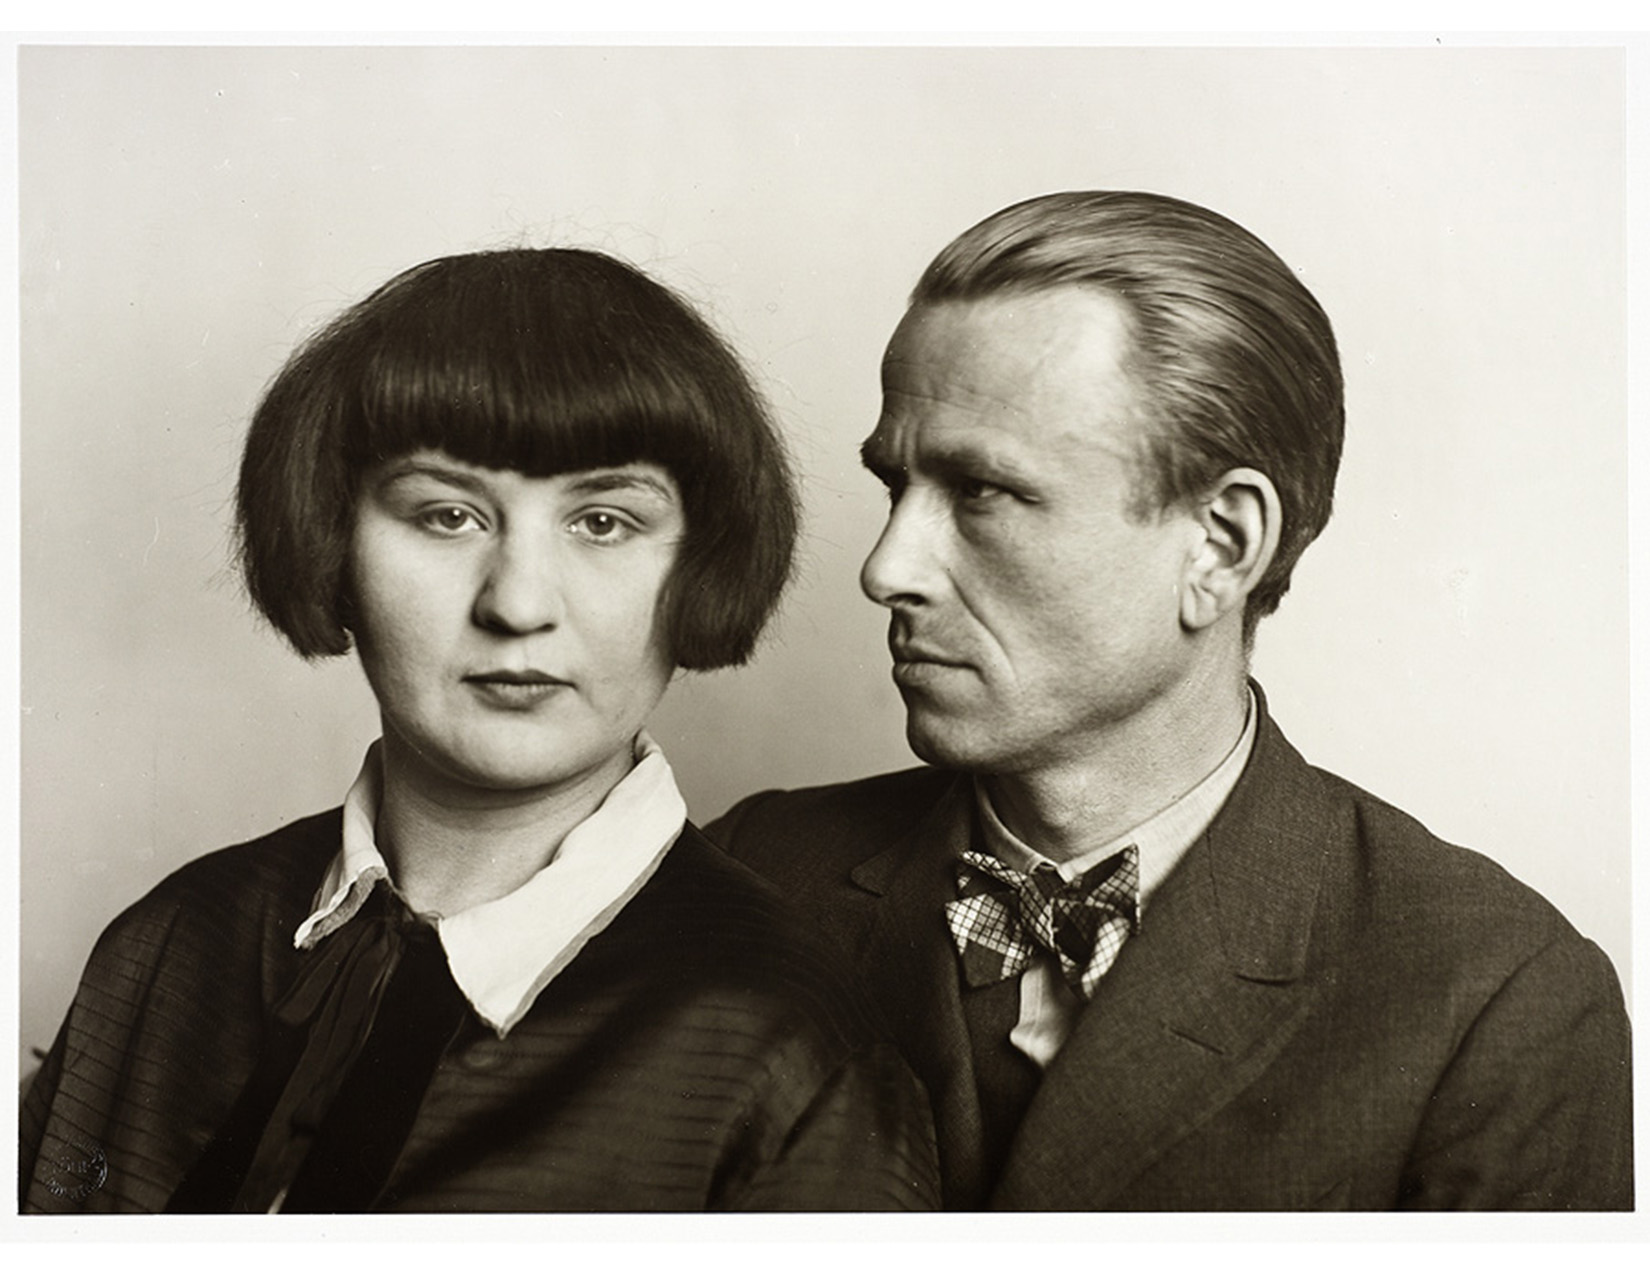 bust portrait of a couple against plain backdrop; woman has a dark blouse with white collar, she has cropped hair and a serious expression looks out at the camera; the man seated overlapping with her has a suit, light shirt and printed bow tie, he has slicked back hair, a serious expression and is looking at her